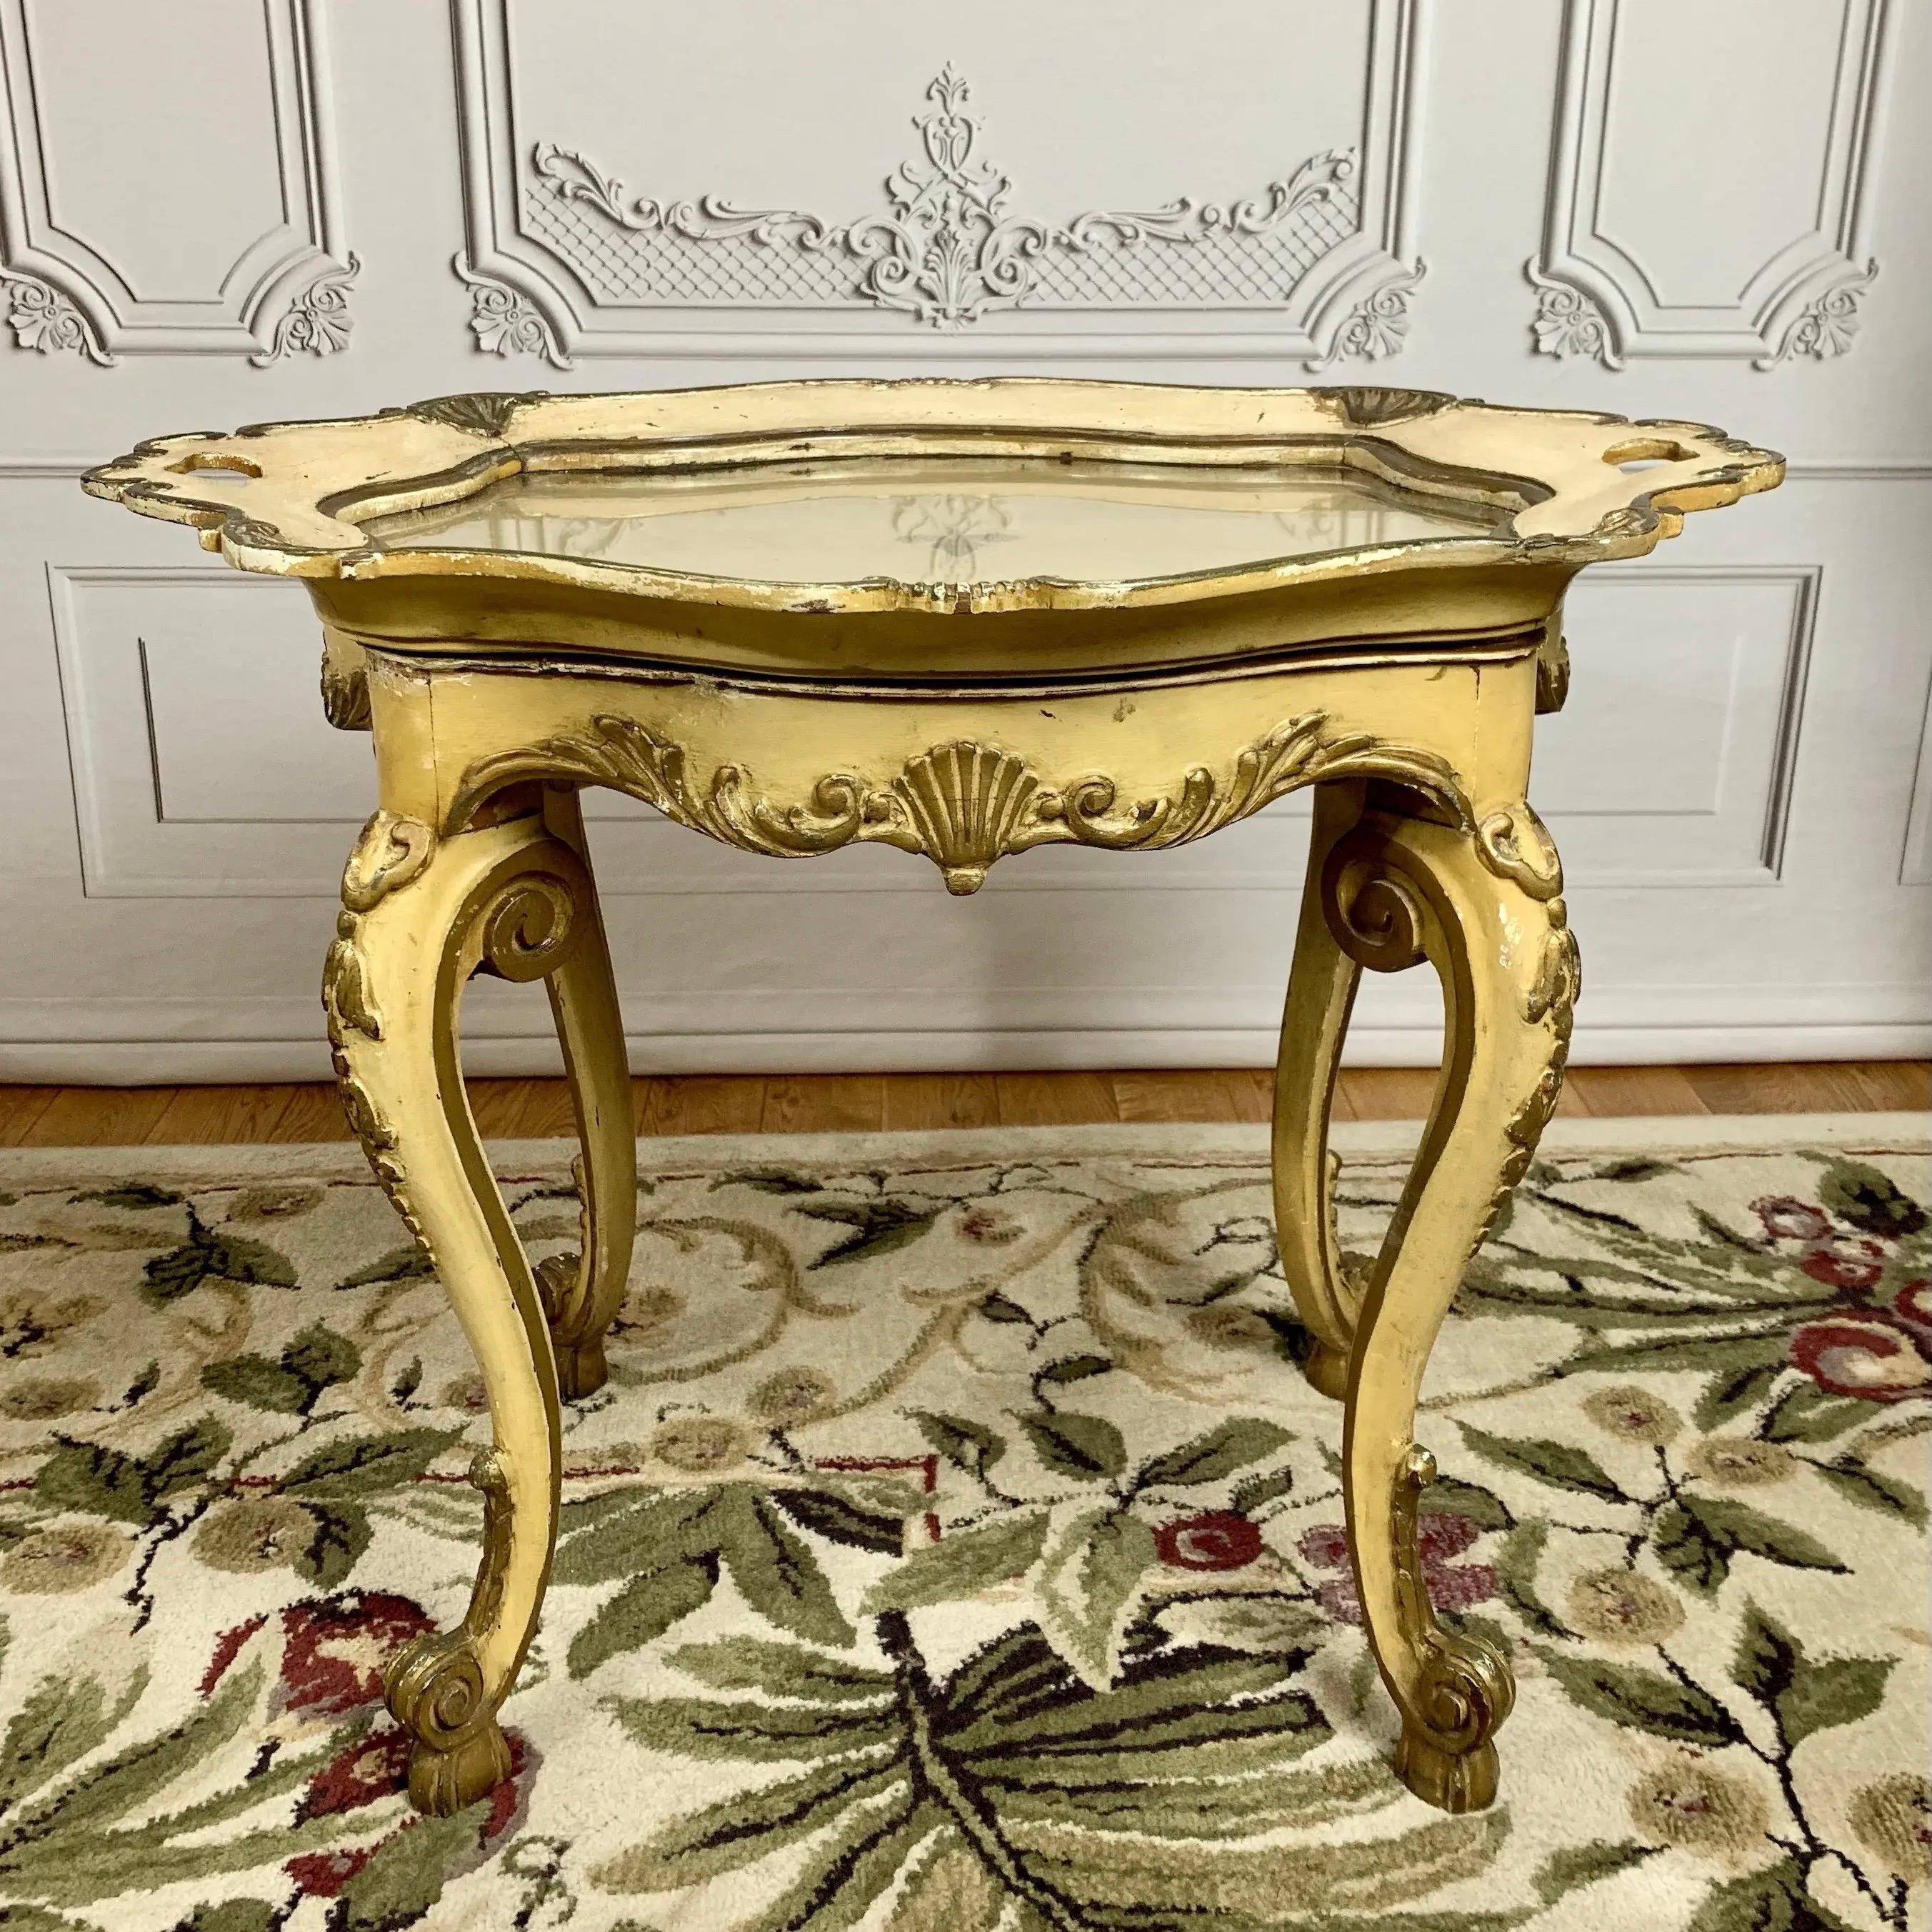 Add a touch of old world elegance to your home décor with this Louis XV Rococo Style Tray Table. Made in France circa late 18th century. A lavishly decorated lightweight accent table purposefully designed with ease of mobility in mind. Featuring a